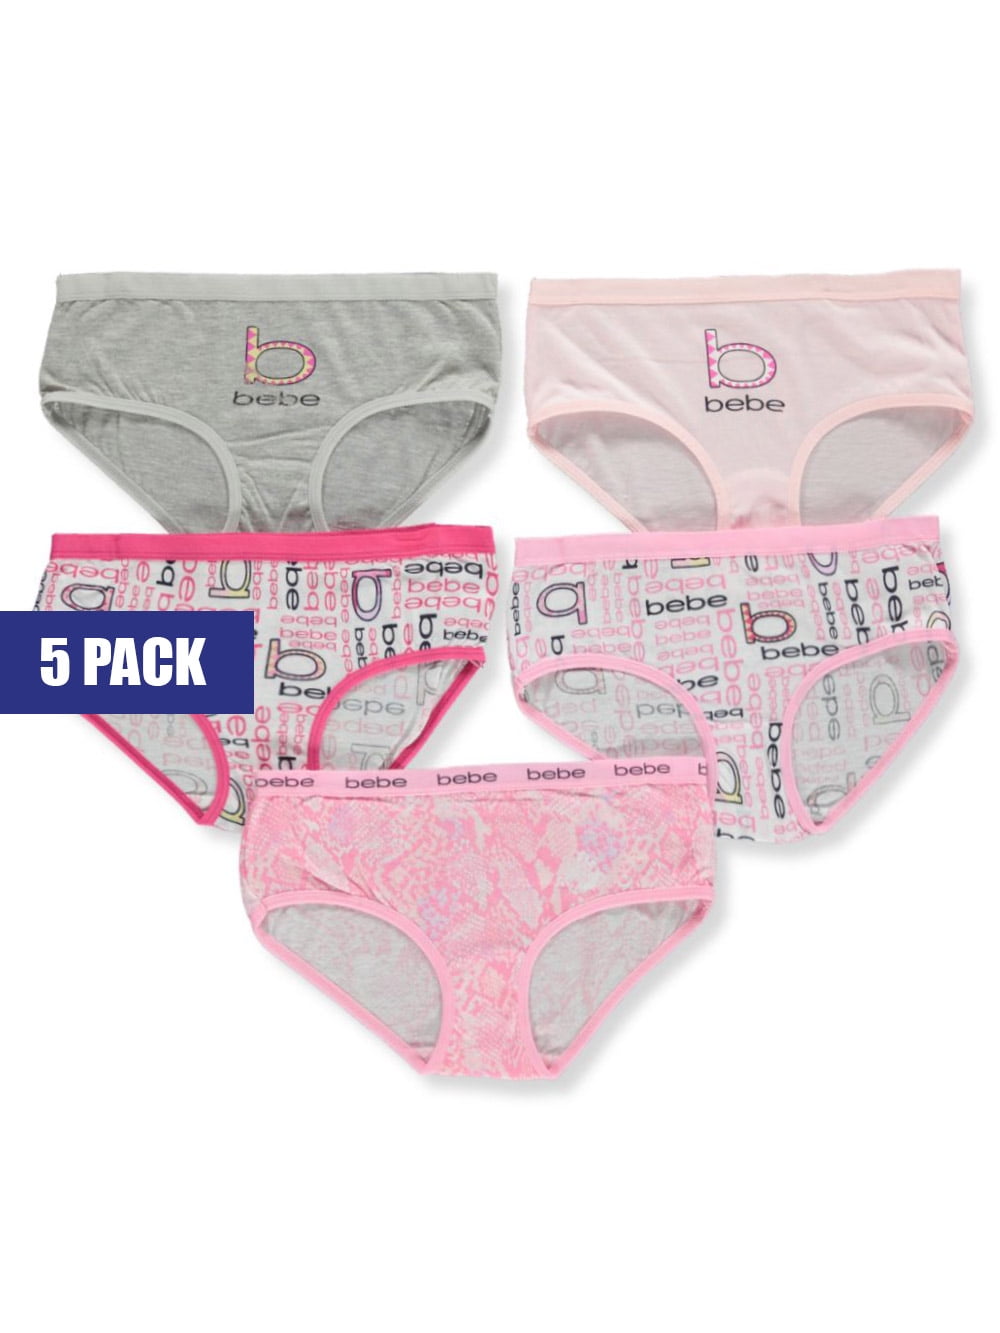 NEW TCP girls size 10-12 years Days of the Week Underwear - baby